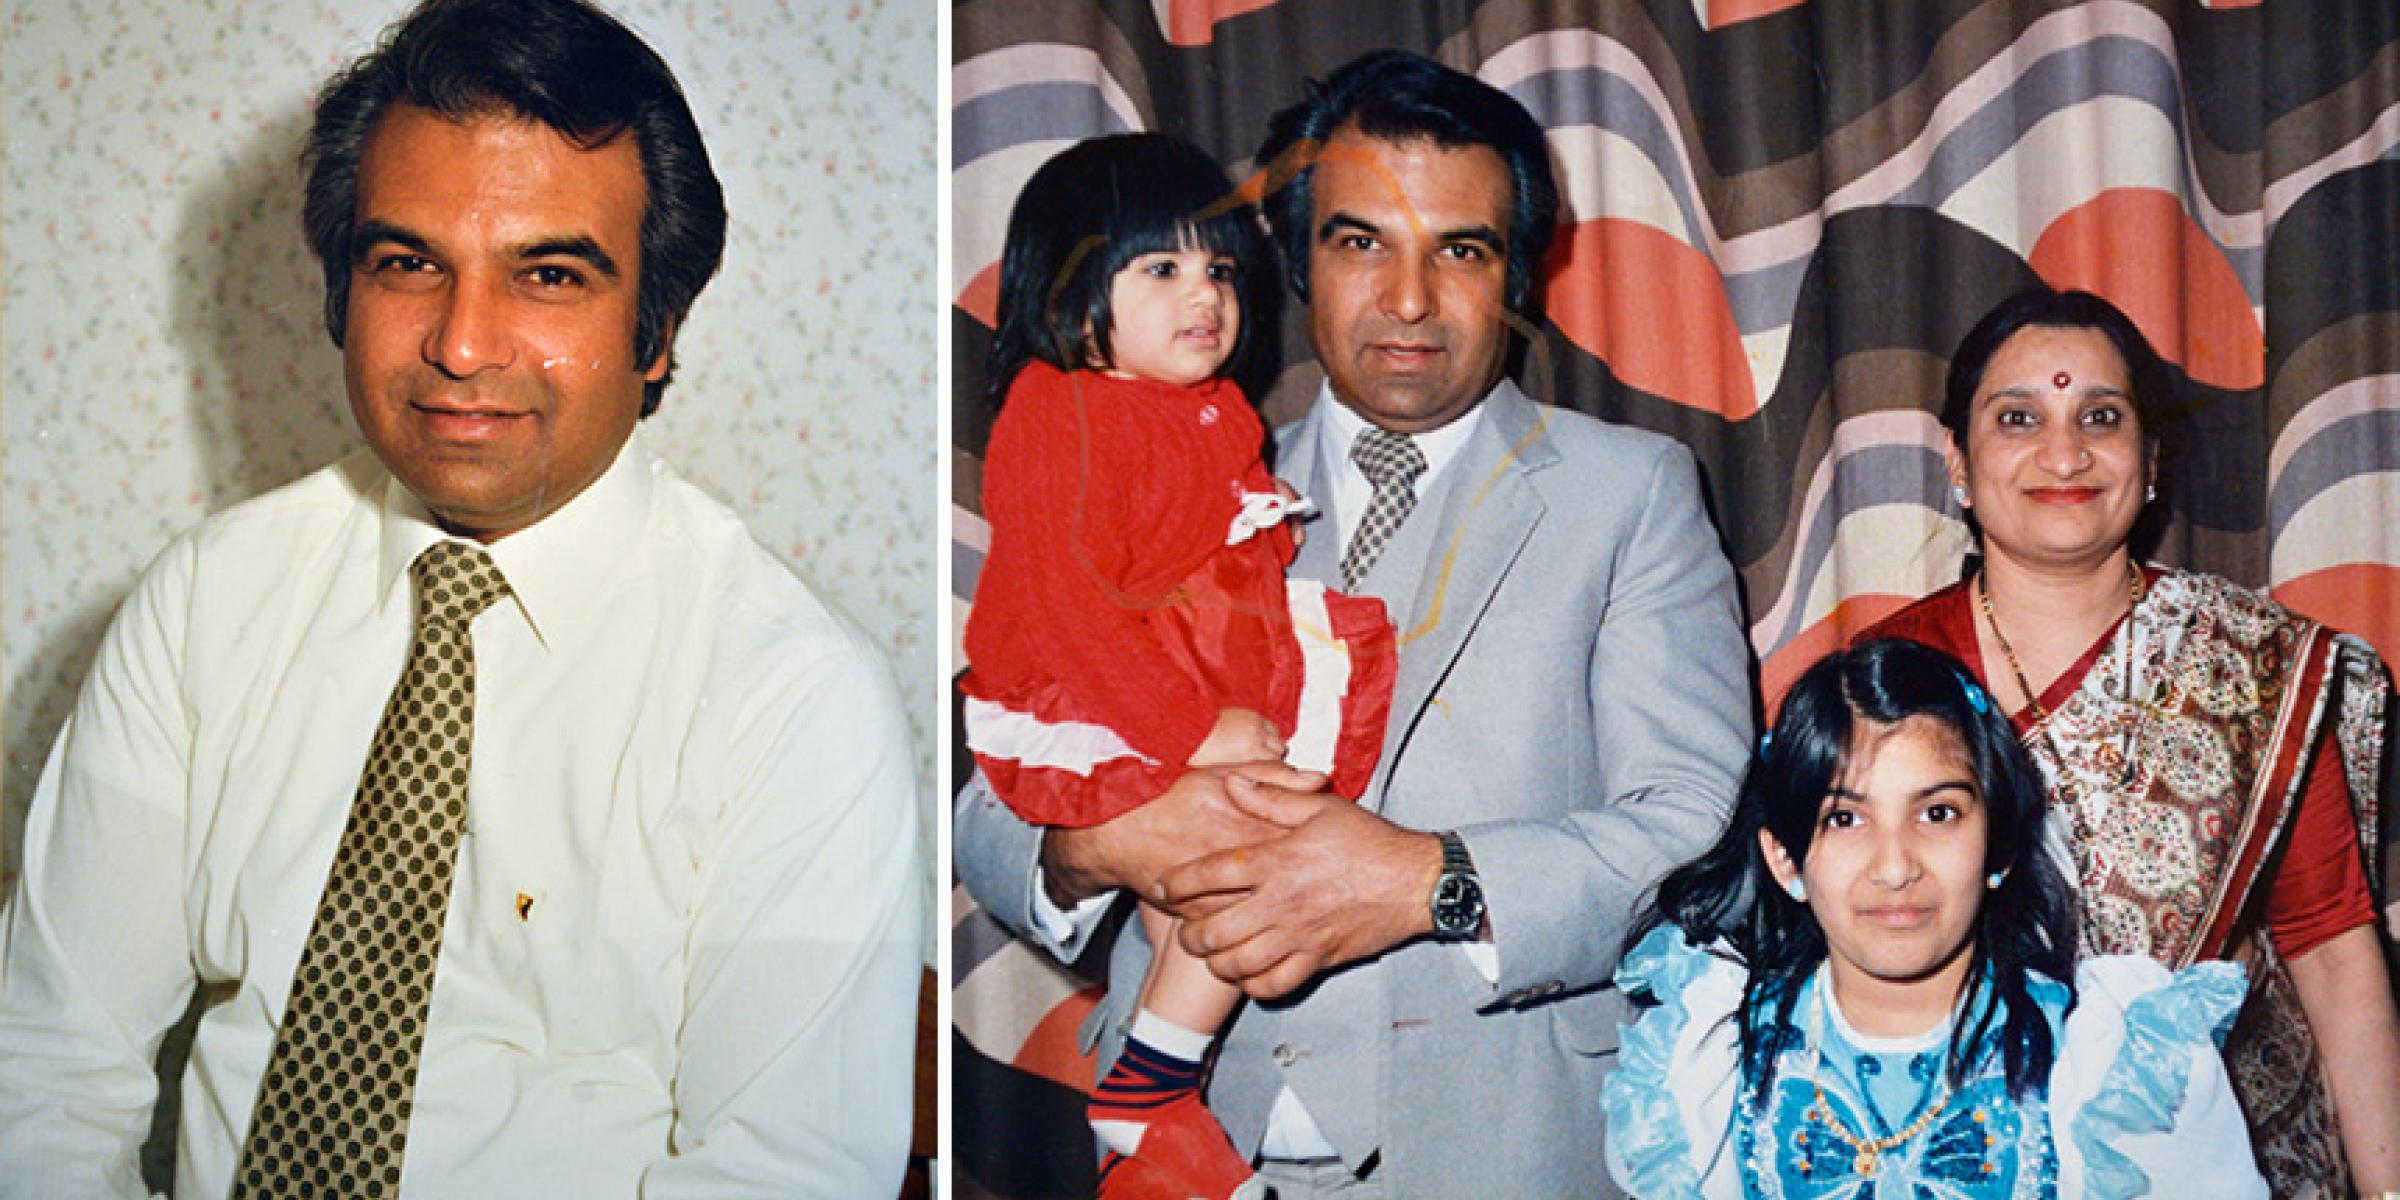 Old photographs of Dinesh with his wife and children